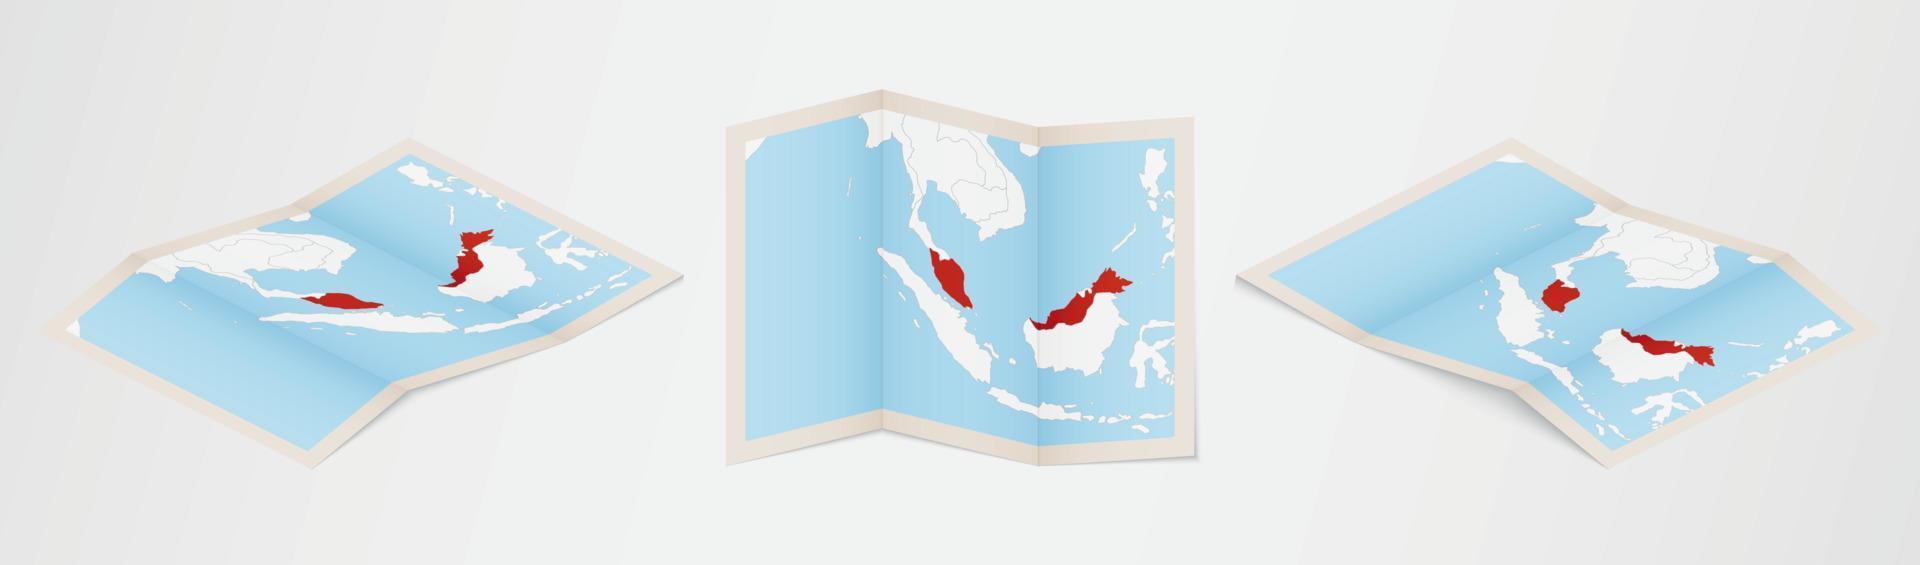 Folded map of Malaysia in three different versions. vector